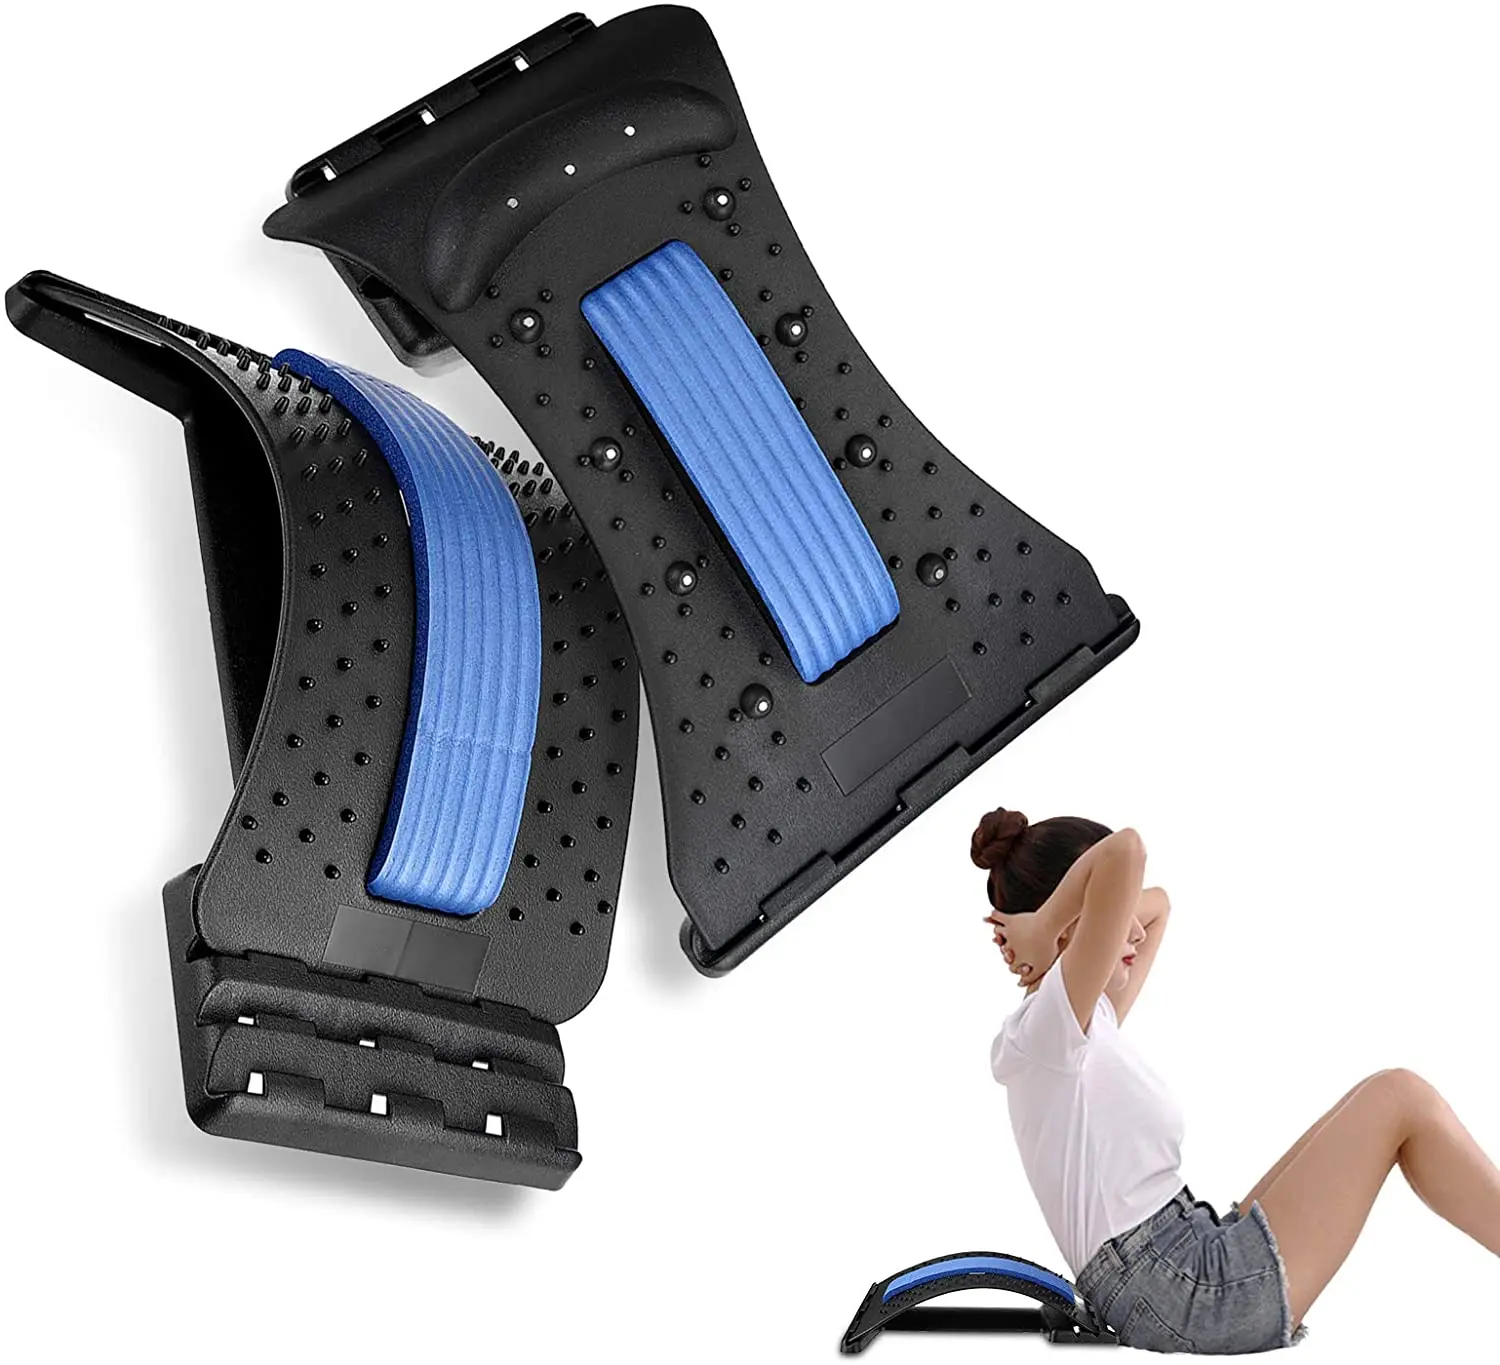 Lumbar Relief Back Stretcher Device Magic Support Stretch Fitness Relaxation Spine Pain Magnetic Traction Massagr | Красота и